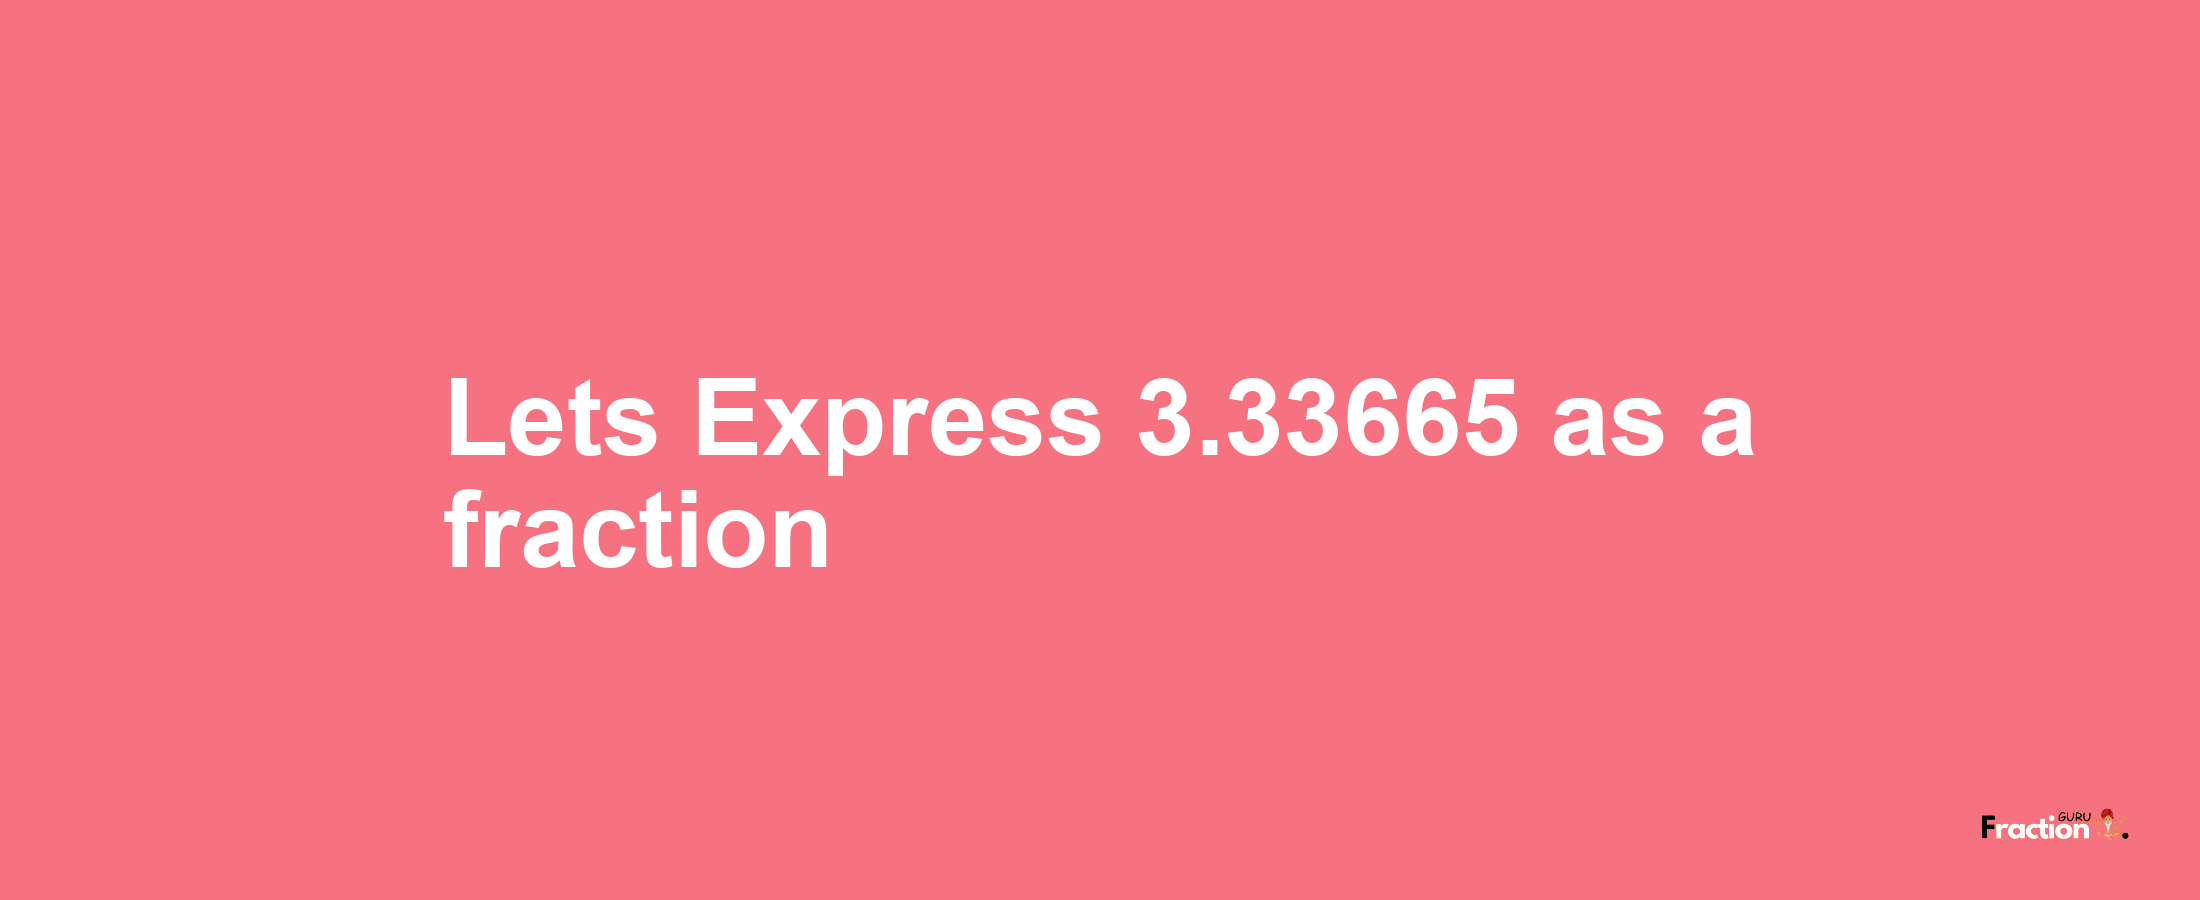 Lets Express 3.33665 as afraction